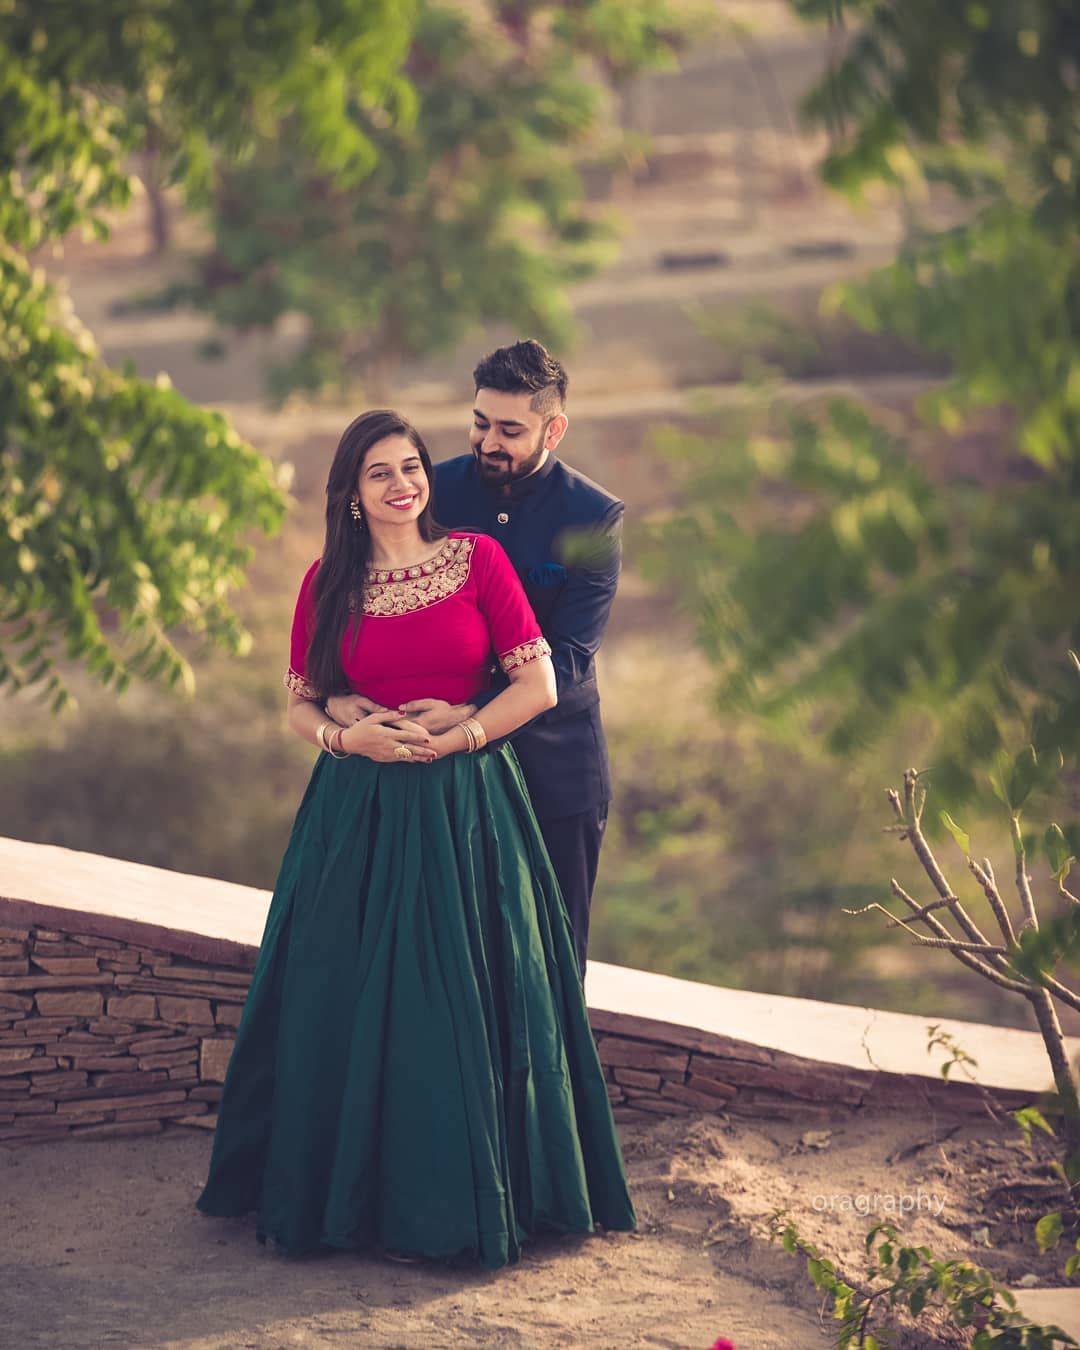 Tulle Photoshoot Gown | Pre wedding Photoshoot Dress Ideas | Maternity Gown  For Photoshoot | Photoshoot dress, Tulle photoshoot, Maternity gowns